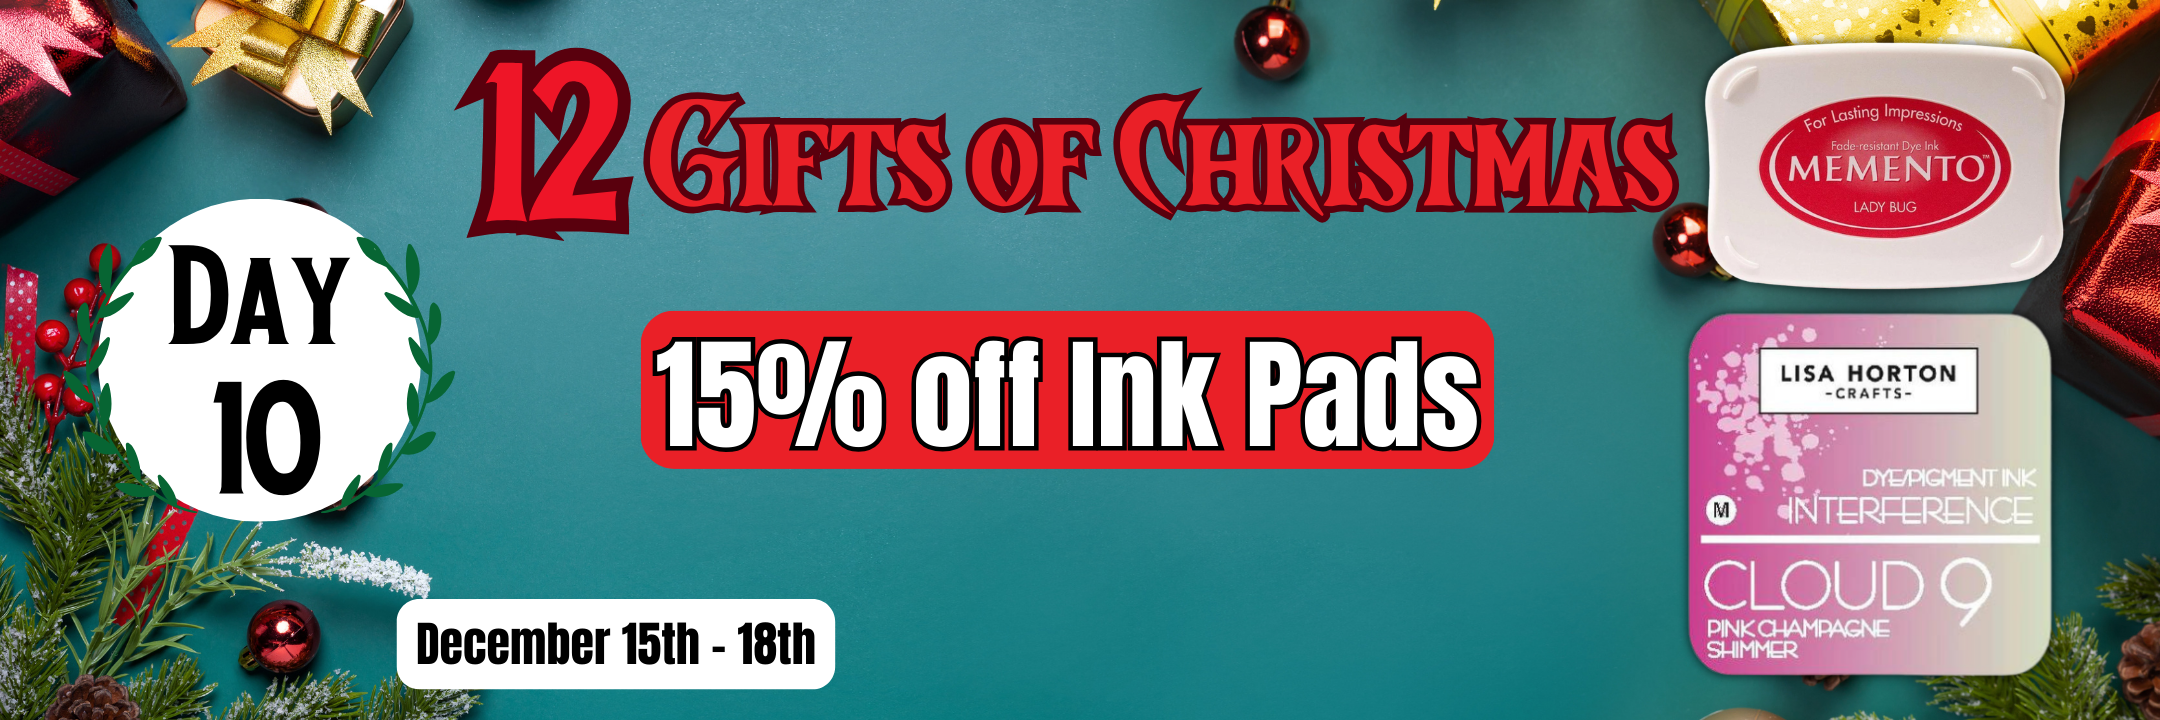 12 Gifts Of Christmas -- Day 10 -- Inks